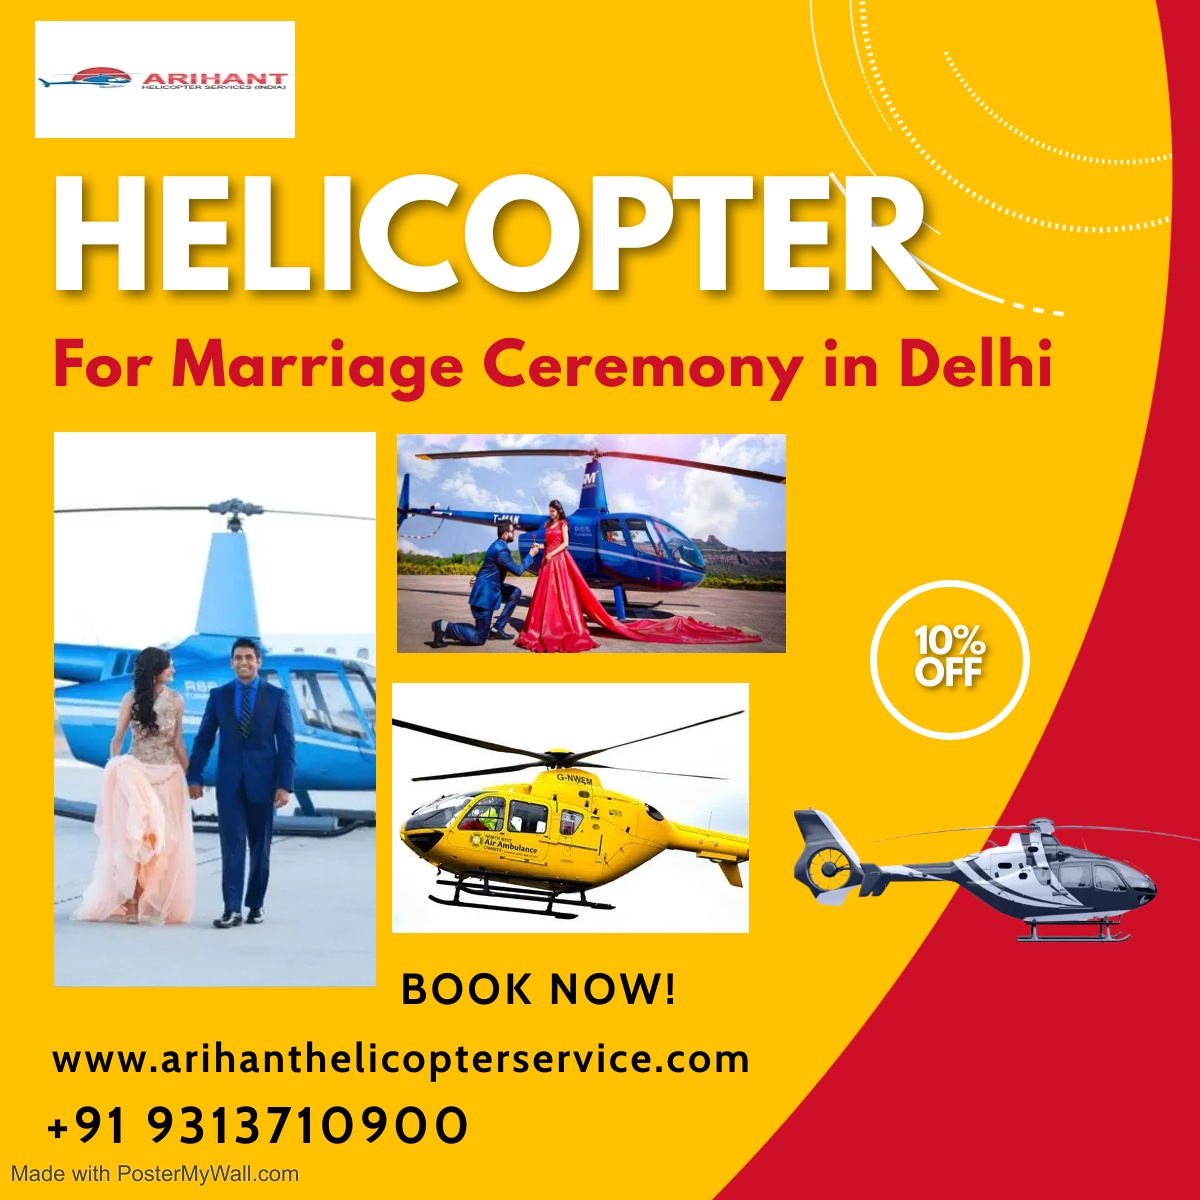 How To Book A Helicopter For Wedding In Delhi